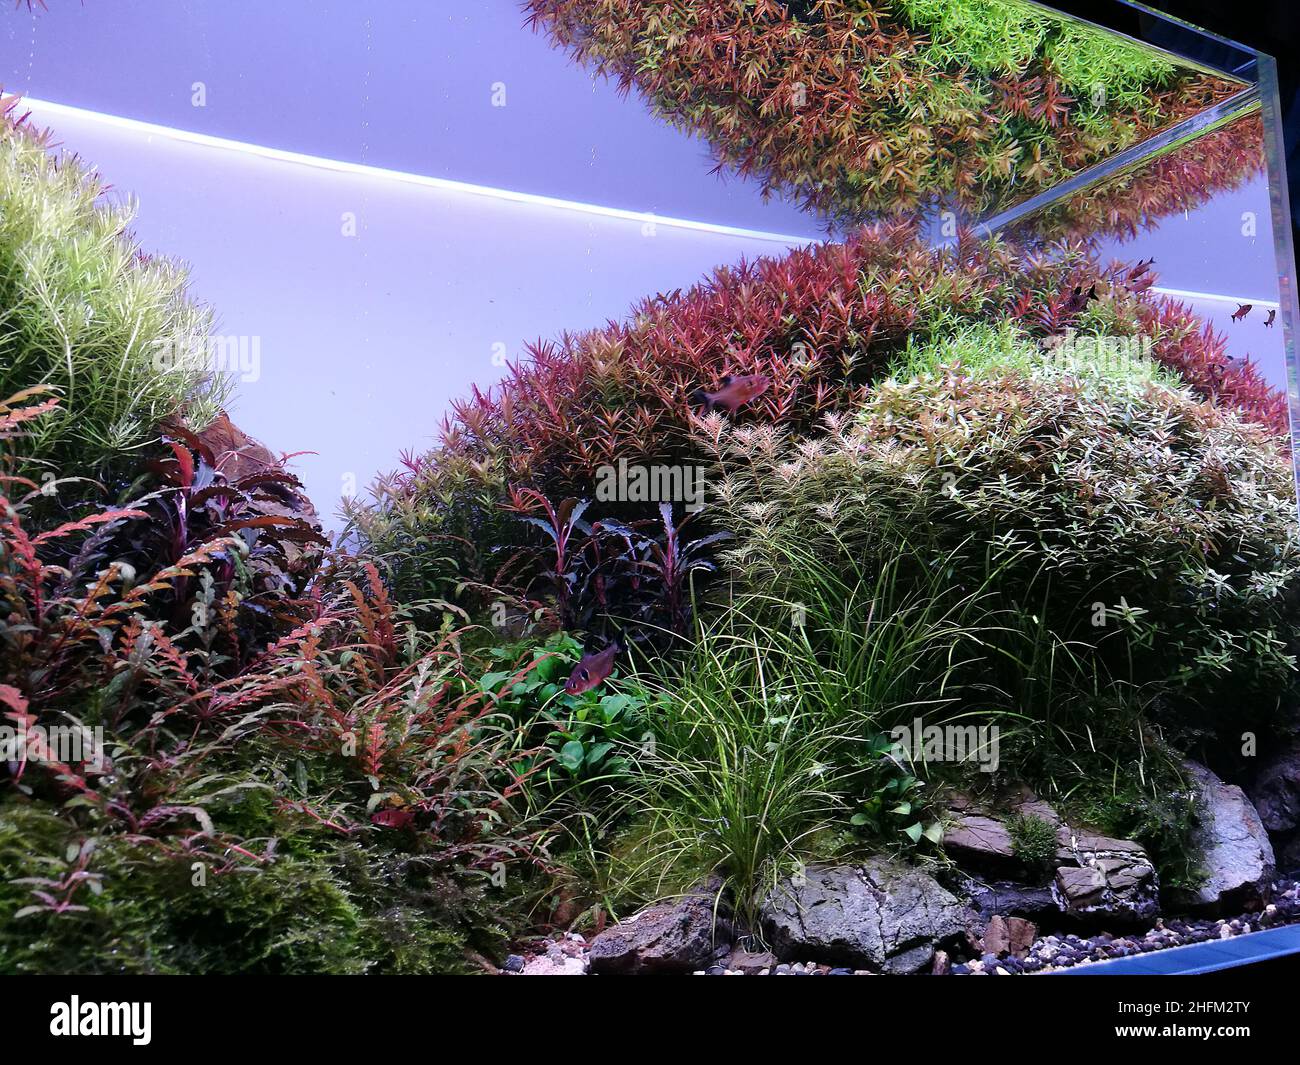 Aquascape aquarium with various freshwater plants. Green and red freshwater plants. Stock Photo